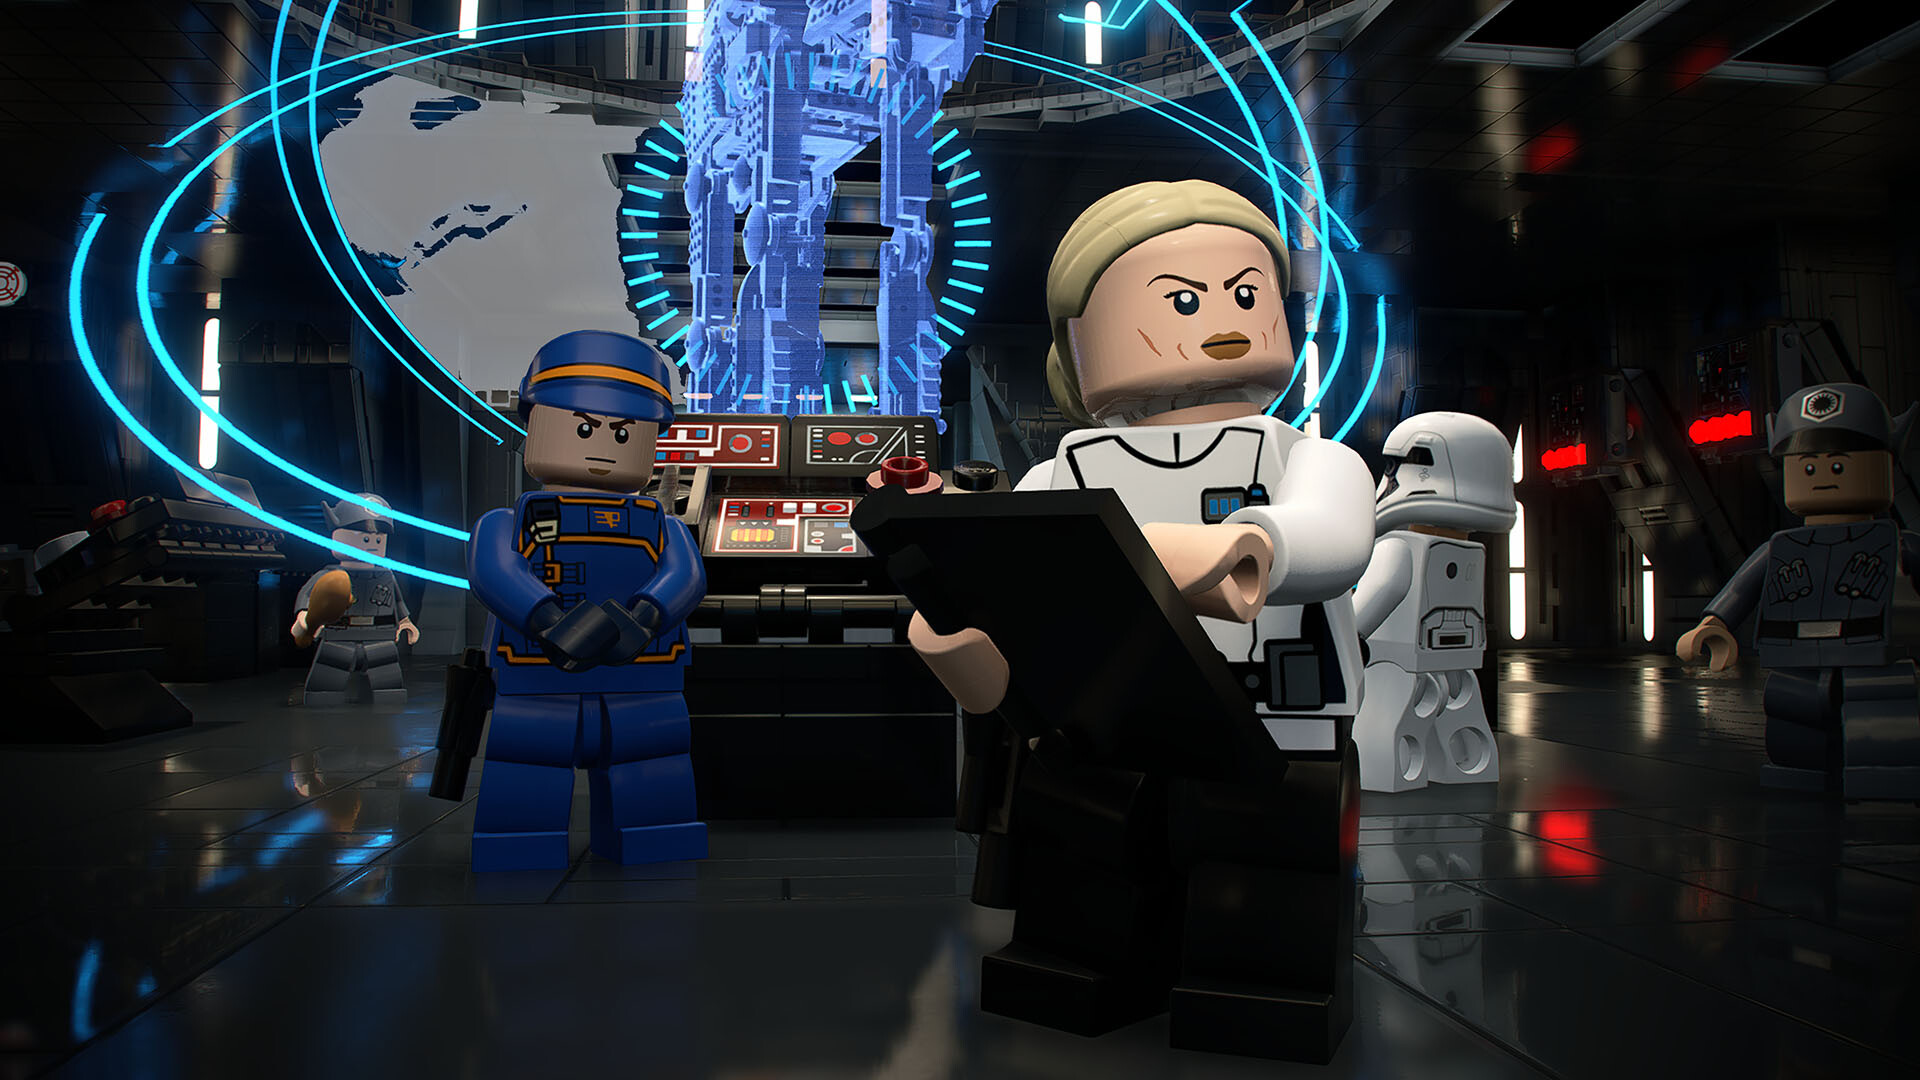 Lego Star Wars The Skywalker Saga co-op: how to play on two screens